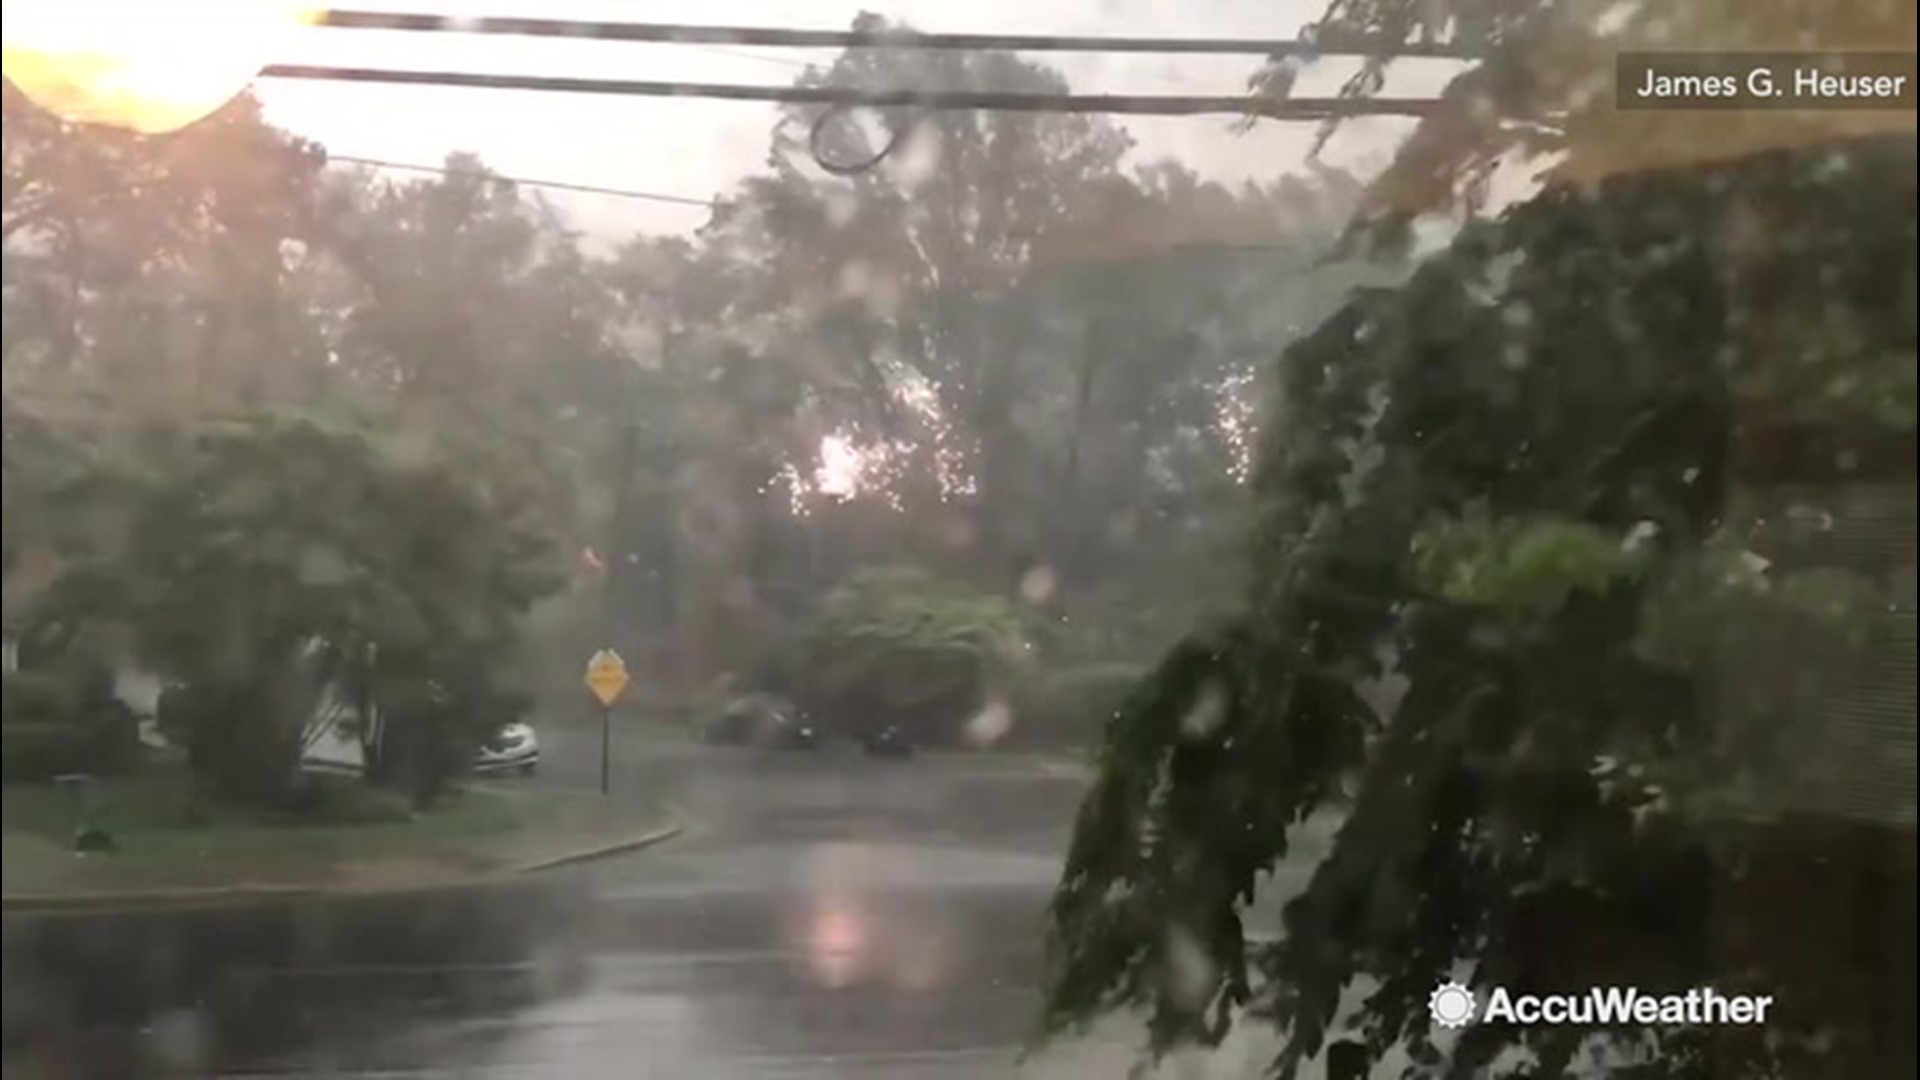 A severe storm made a chaotic scene out in Arlington, Virginia on May 23 when power lines started to send sparks flying from strong winds.